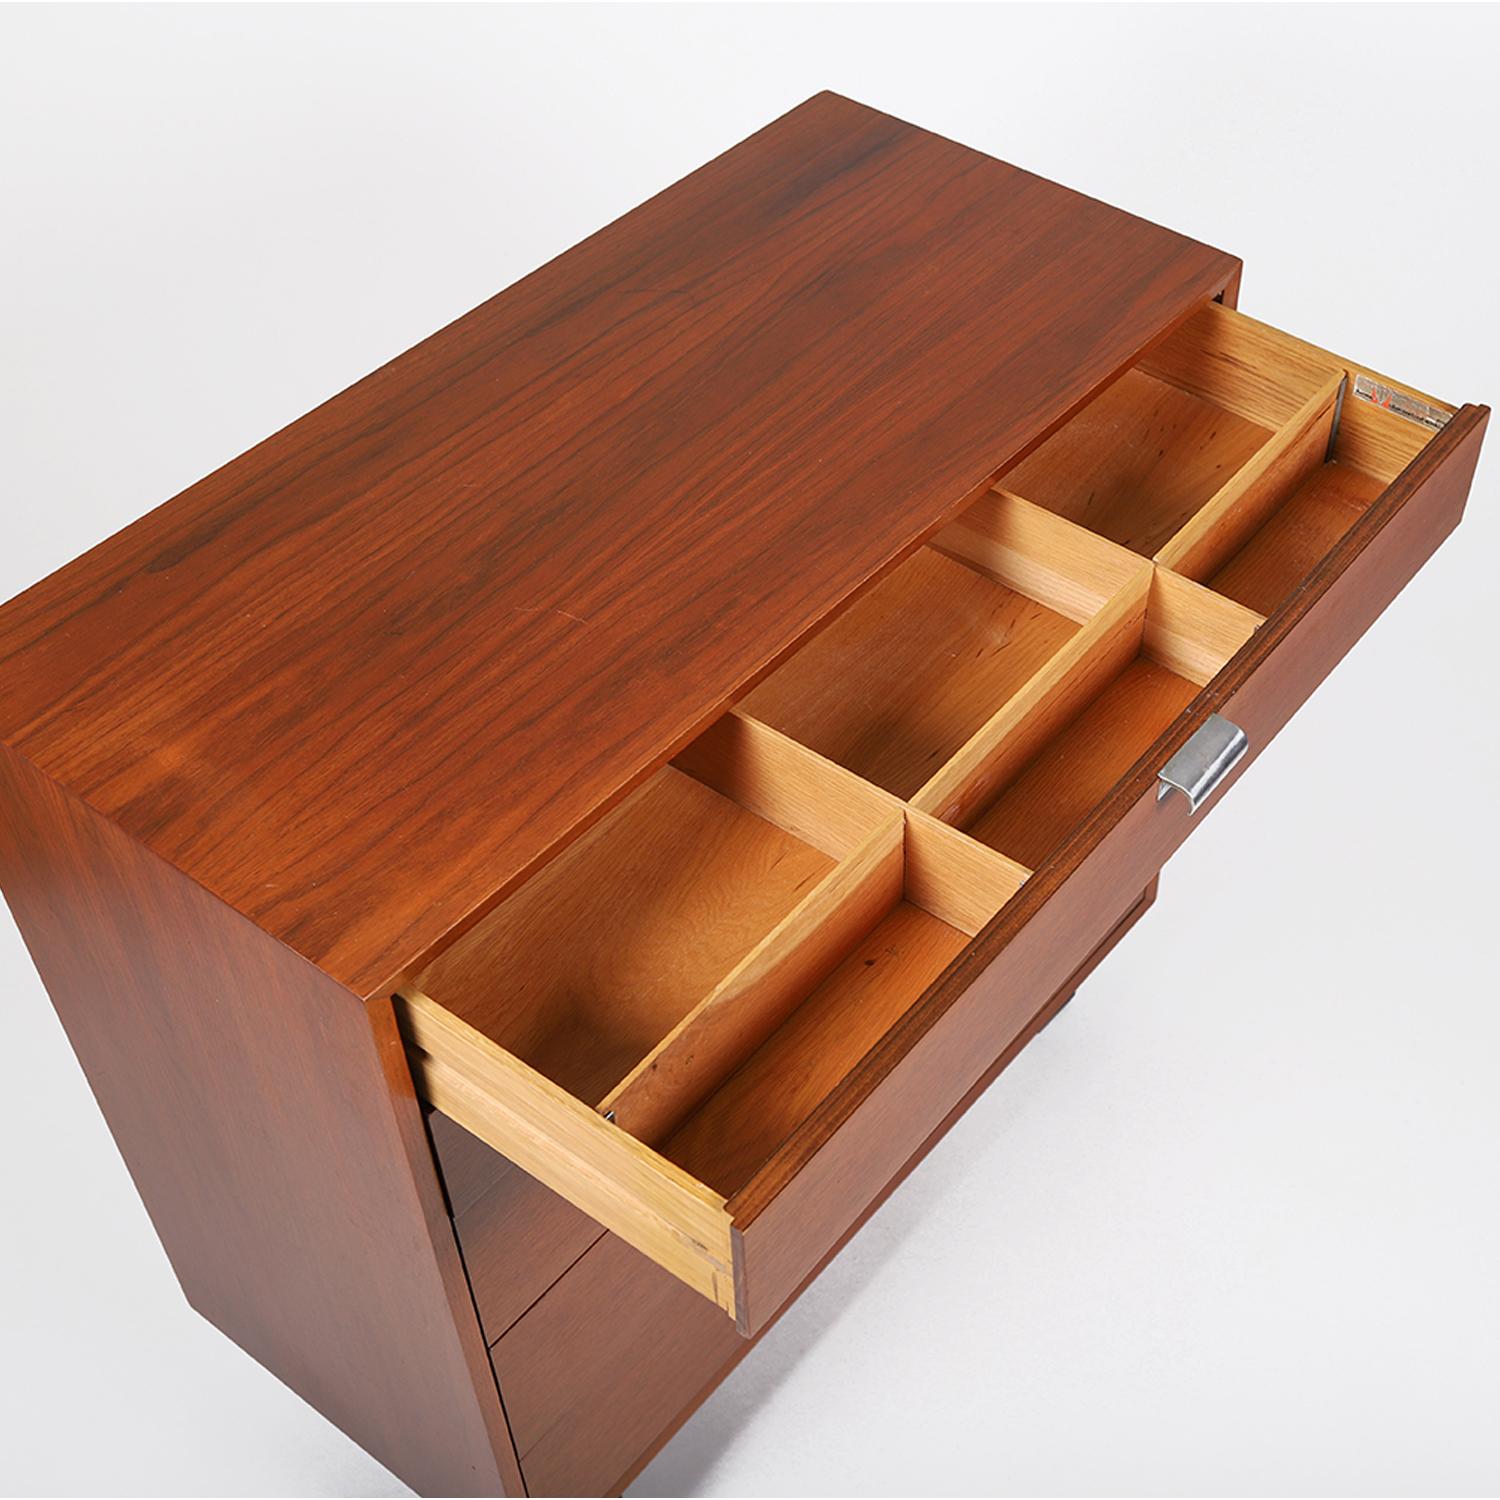 A classic mid-20th century drawer chest designed by George Nelson for Herman Miller. Warm lacquered walnut, top drawer divider, aluminum finger pulls and lacquered black angular base. Top two drawer faces are 5